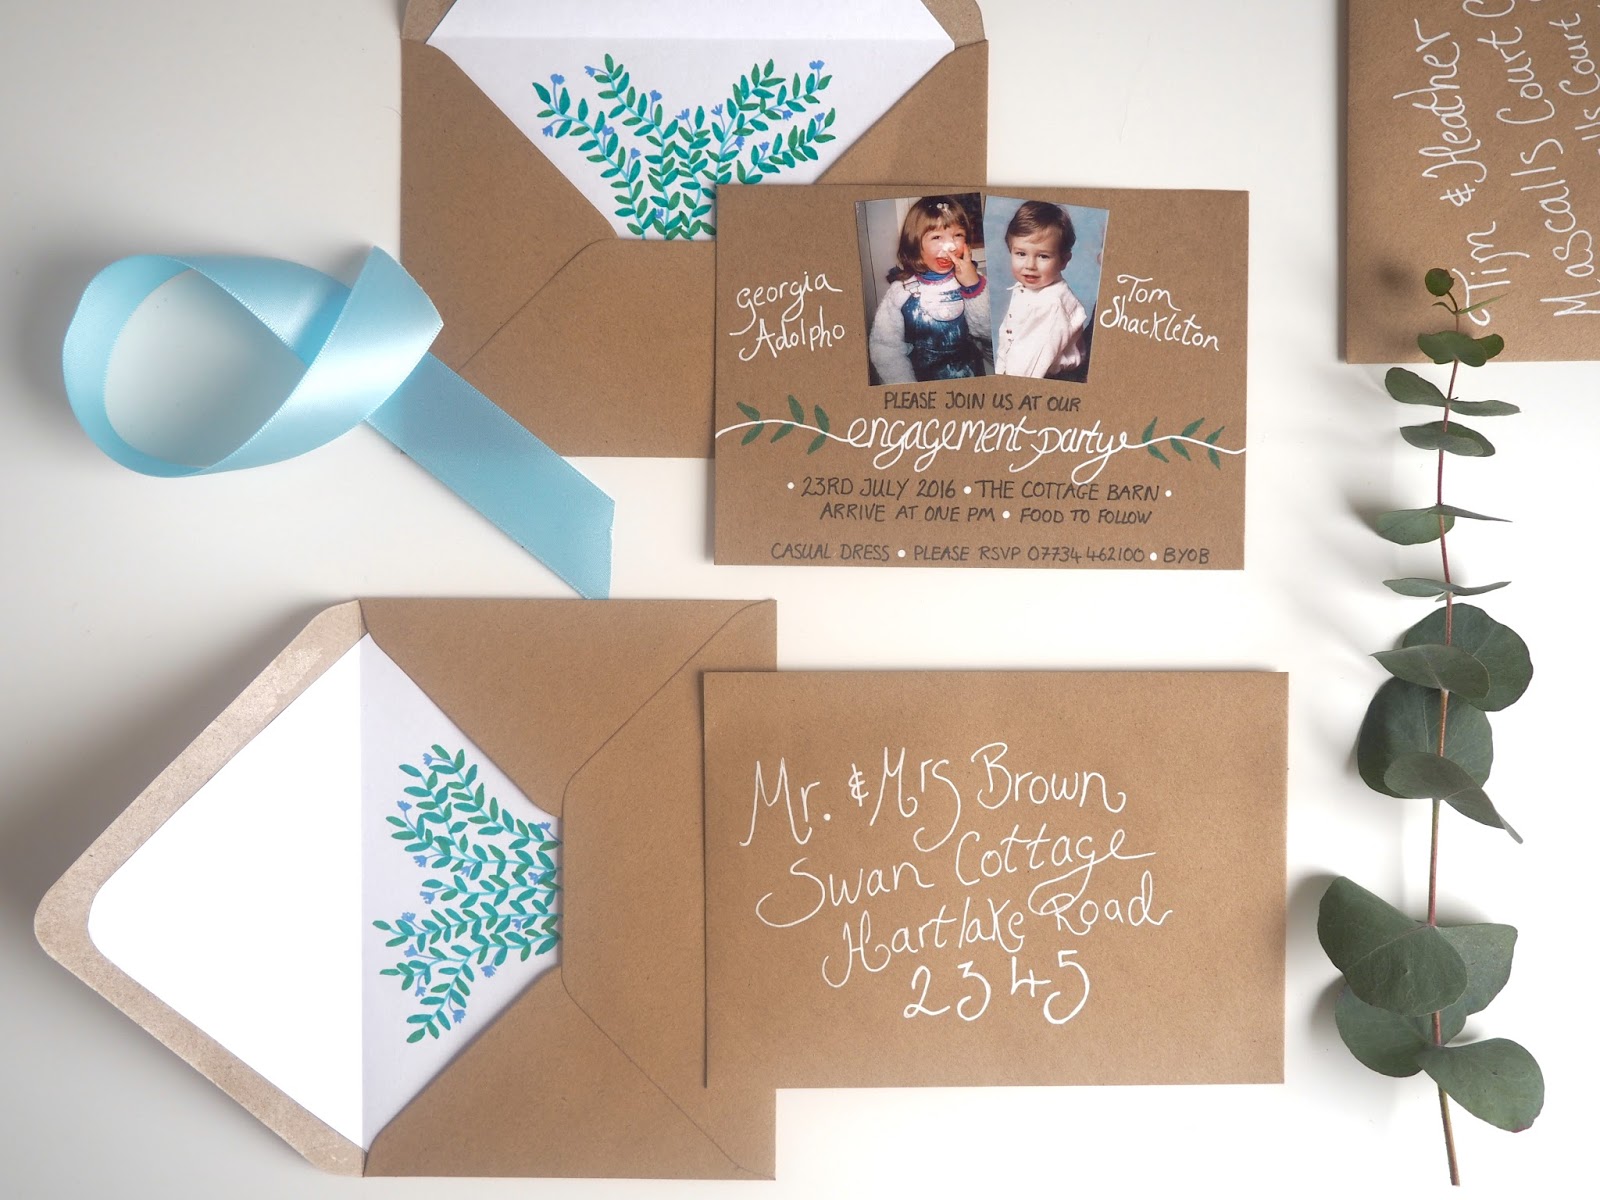 diy-engagement-party-invitations